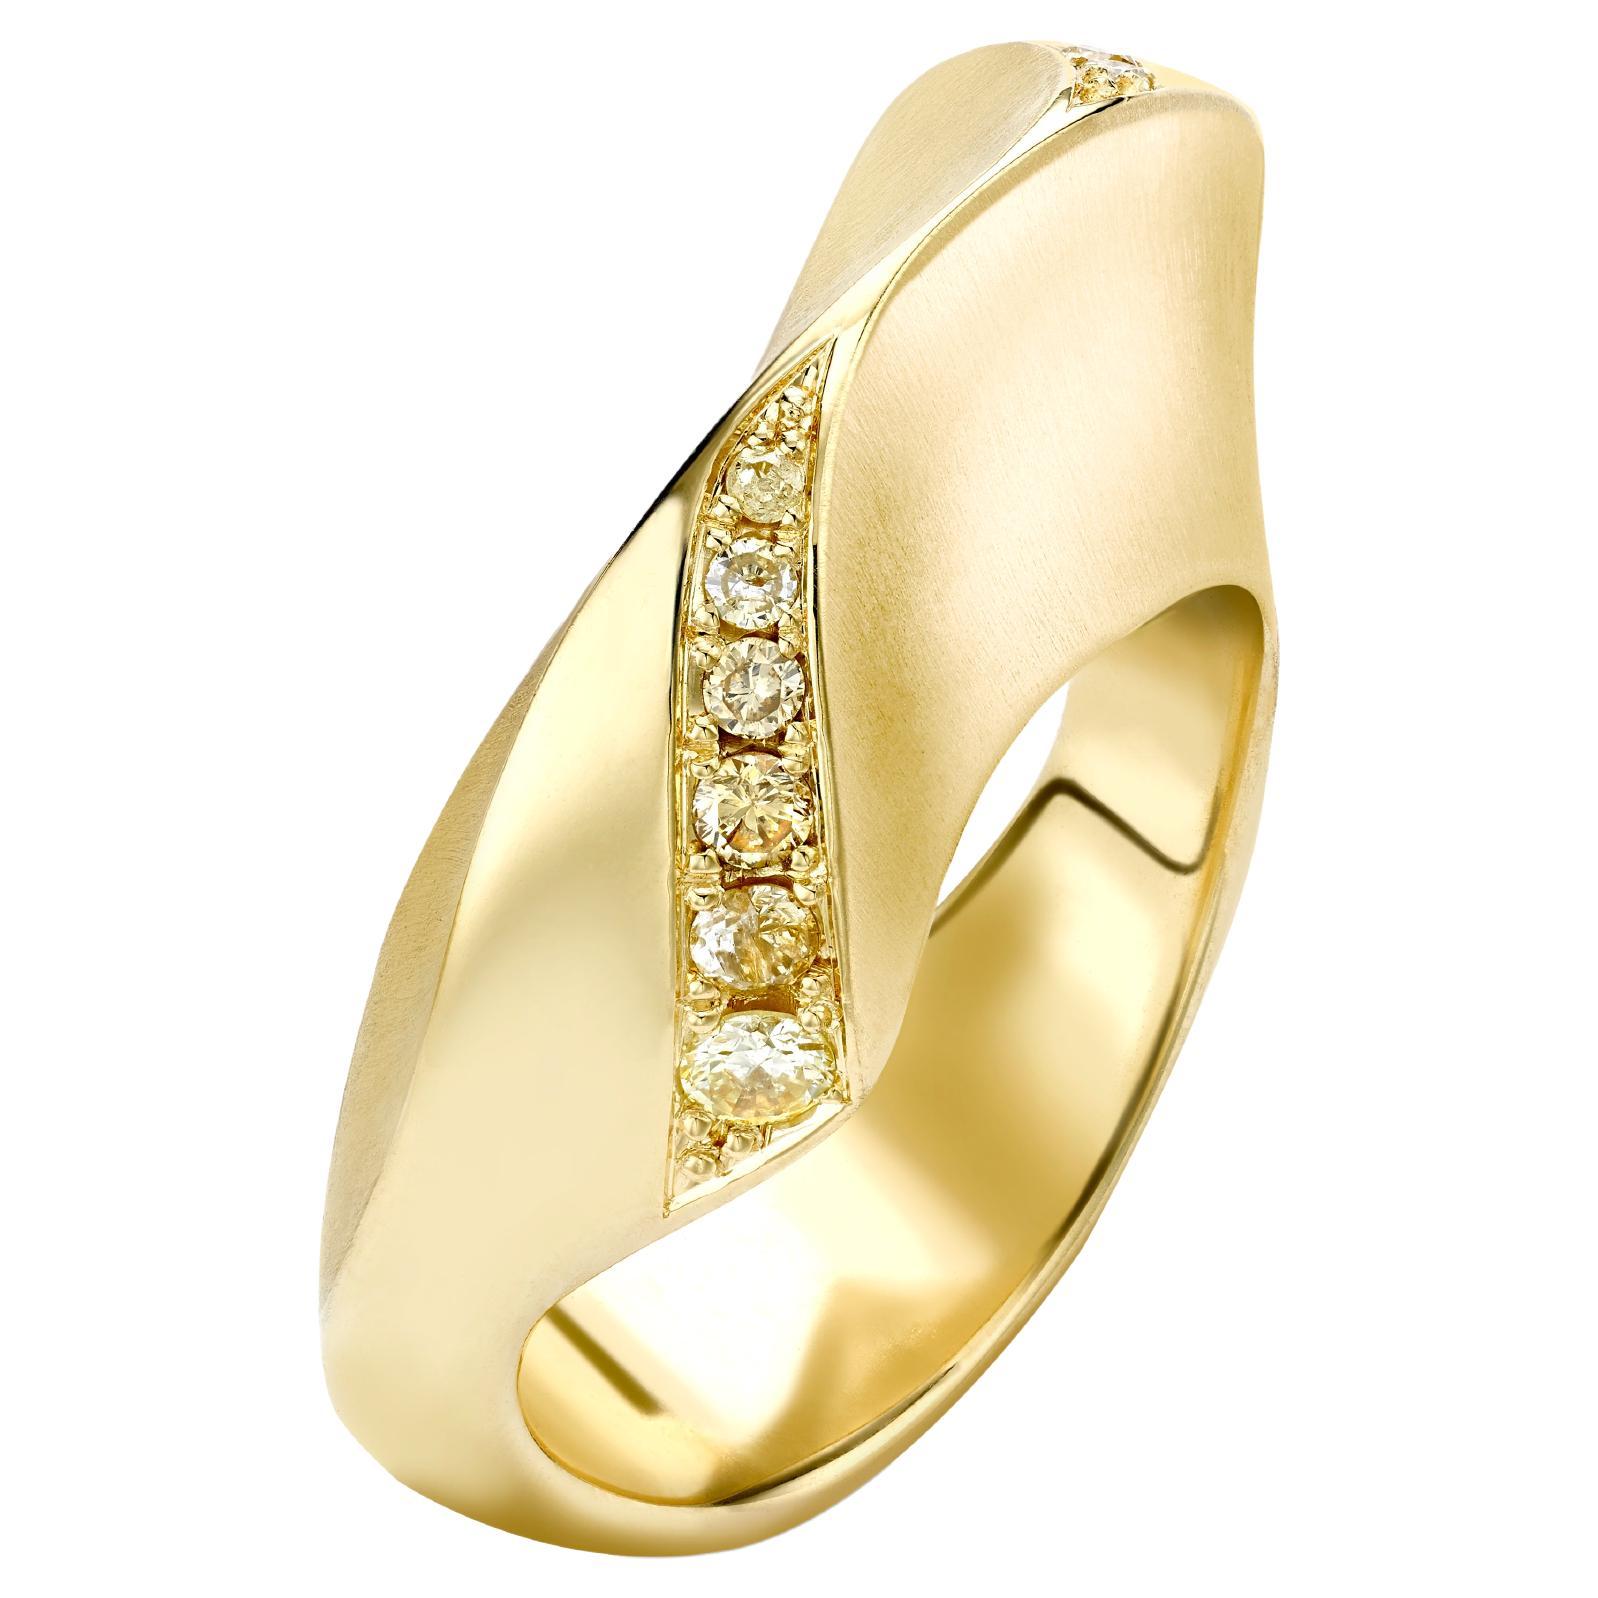 FOLDE RING Yellow gold with a warm-tone diamond edge by Liv Luttrell 